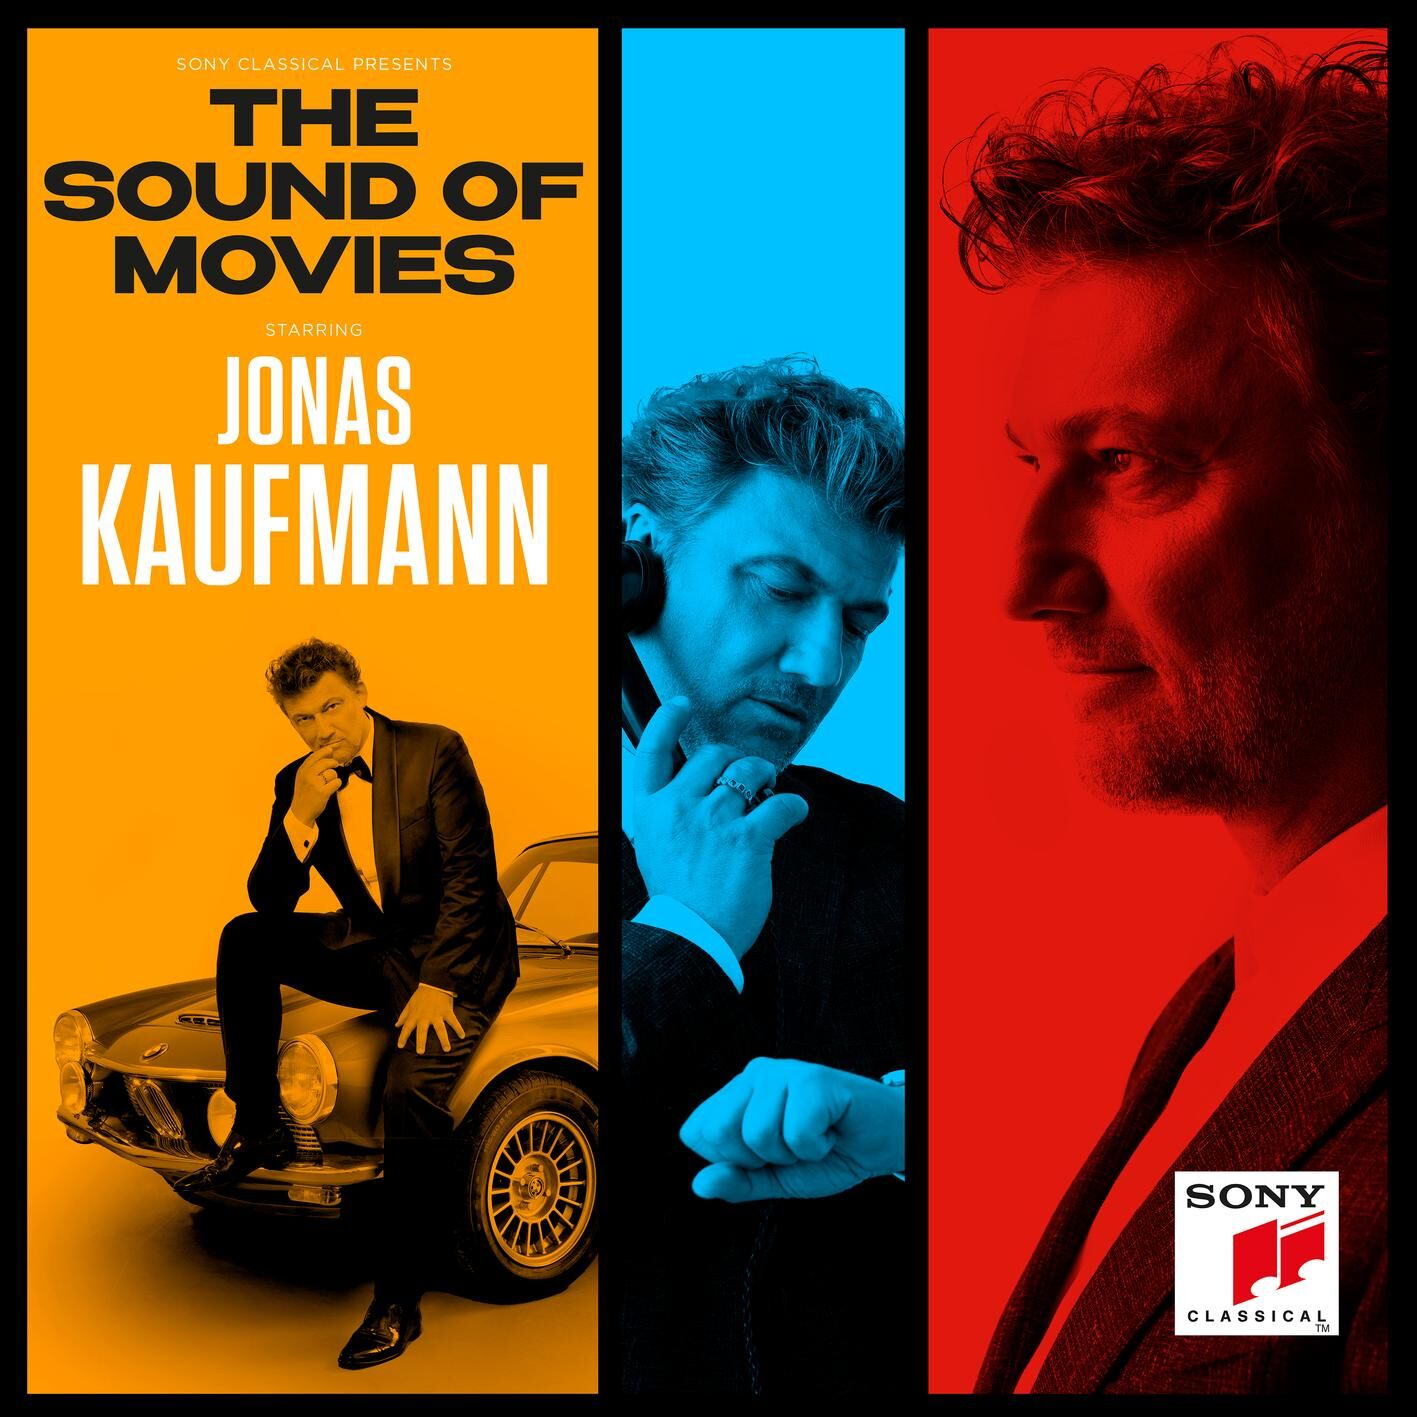 Классика Sony Music Jonas Kaufmann - The Sound Of Movies (Black Vinyl 2LP) black corded phone desk landline phone telephone dtmf fsk dual system support hands free redial flash speed dial ring volume control built in ic chip high quality sound real time date for elderly seniors home office business hotel